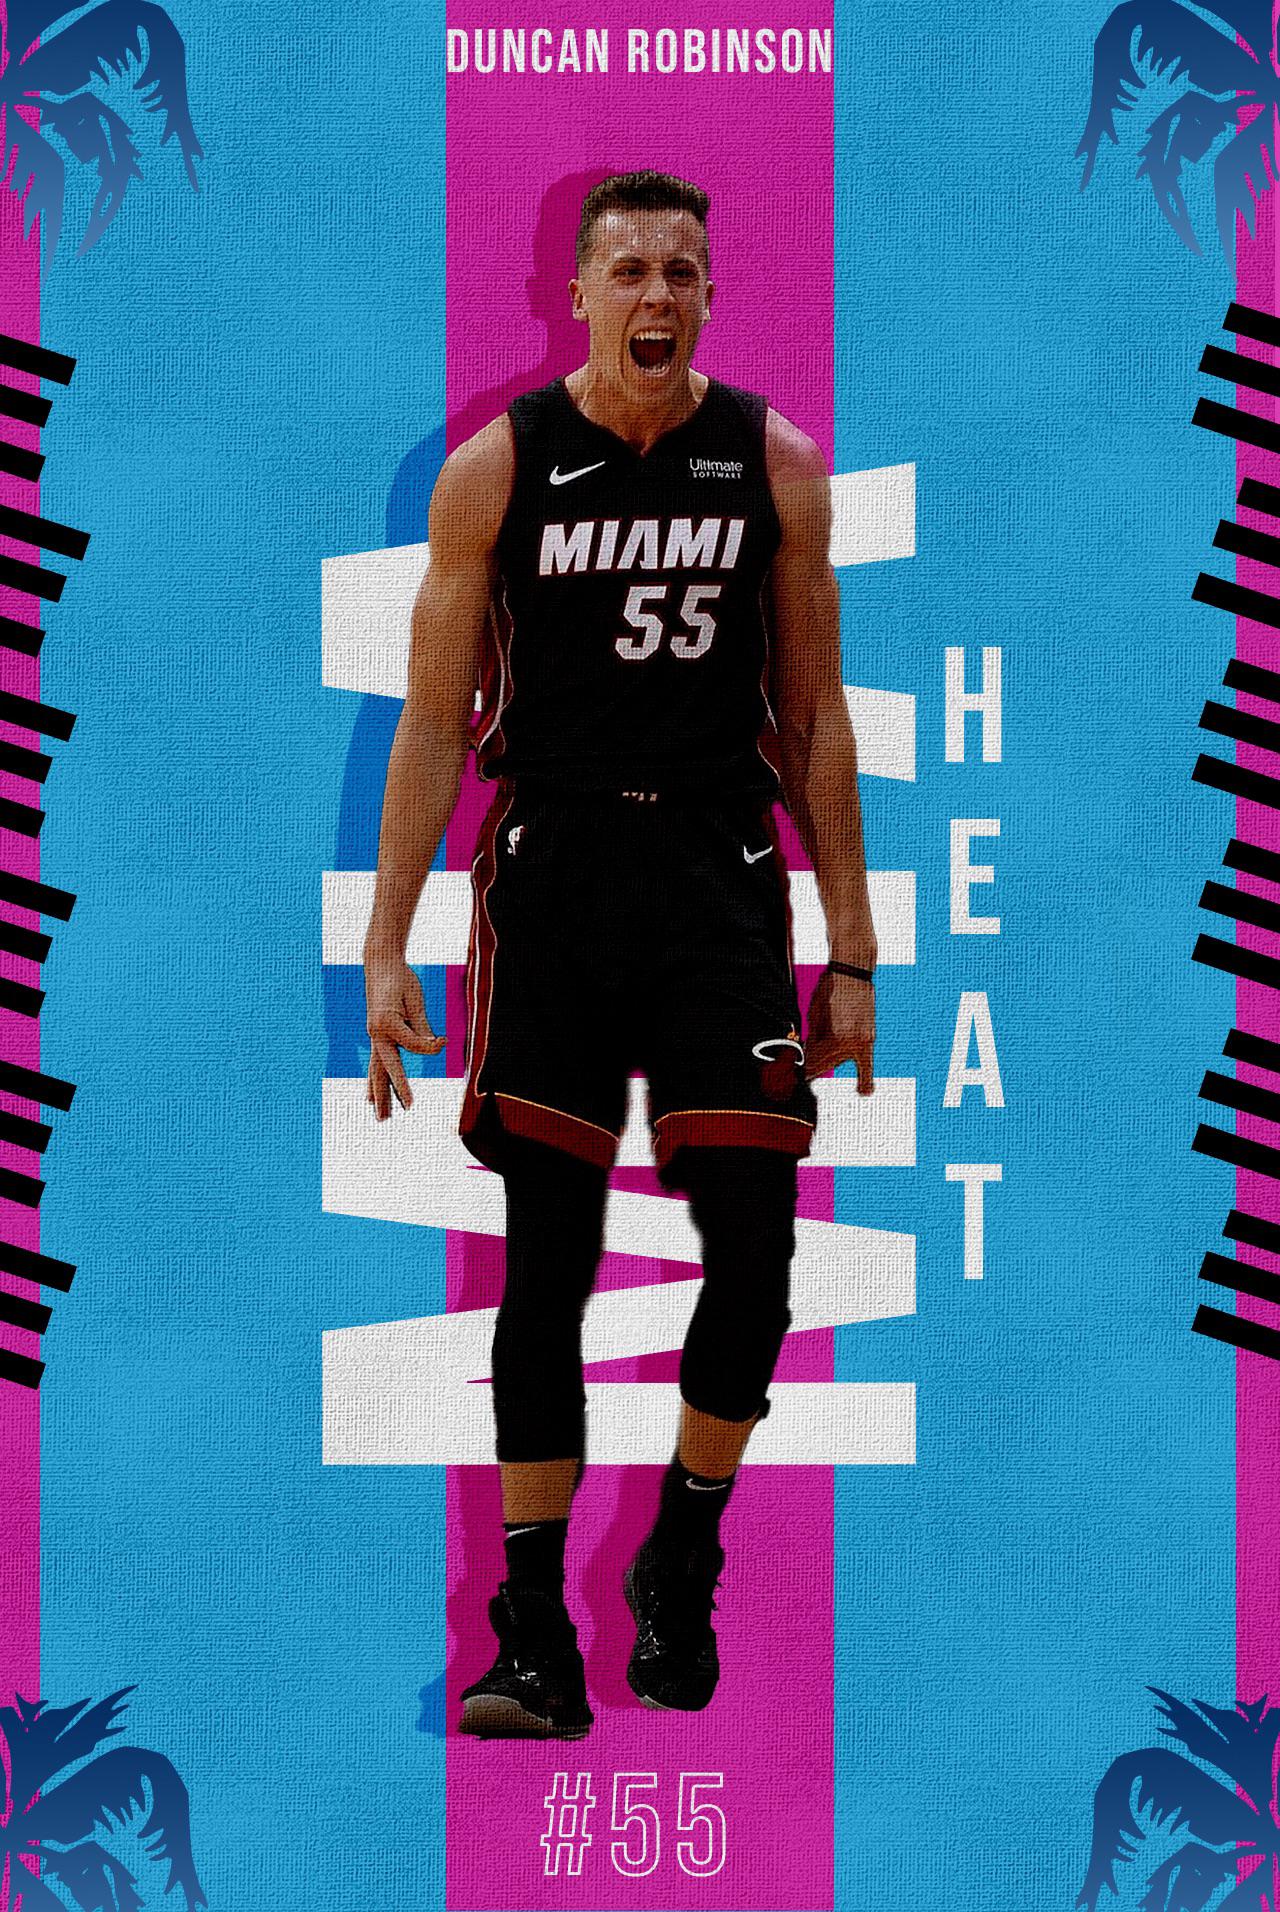 Wallpaper for the best shooter in the NBA